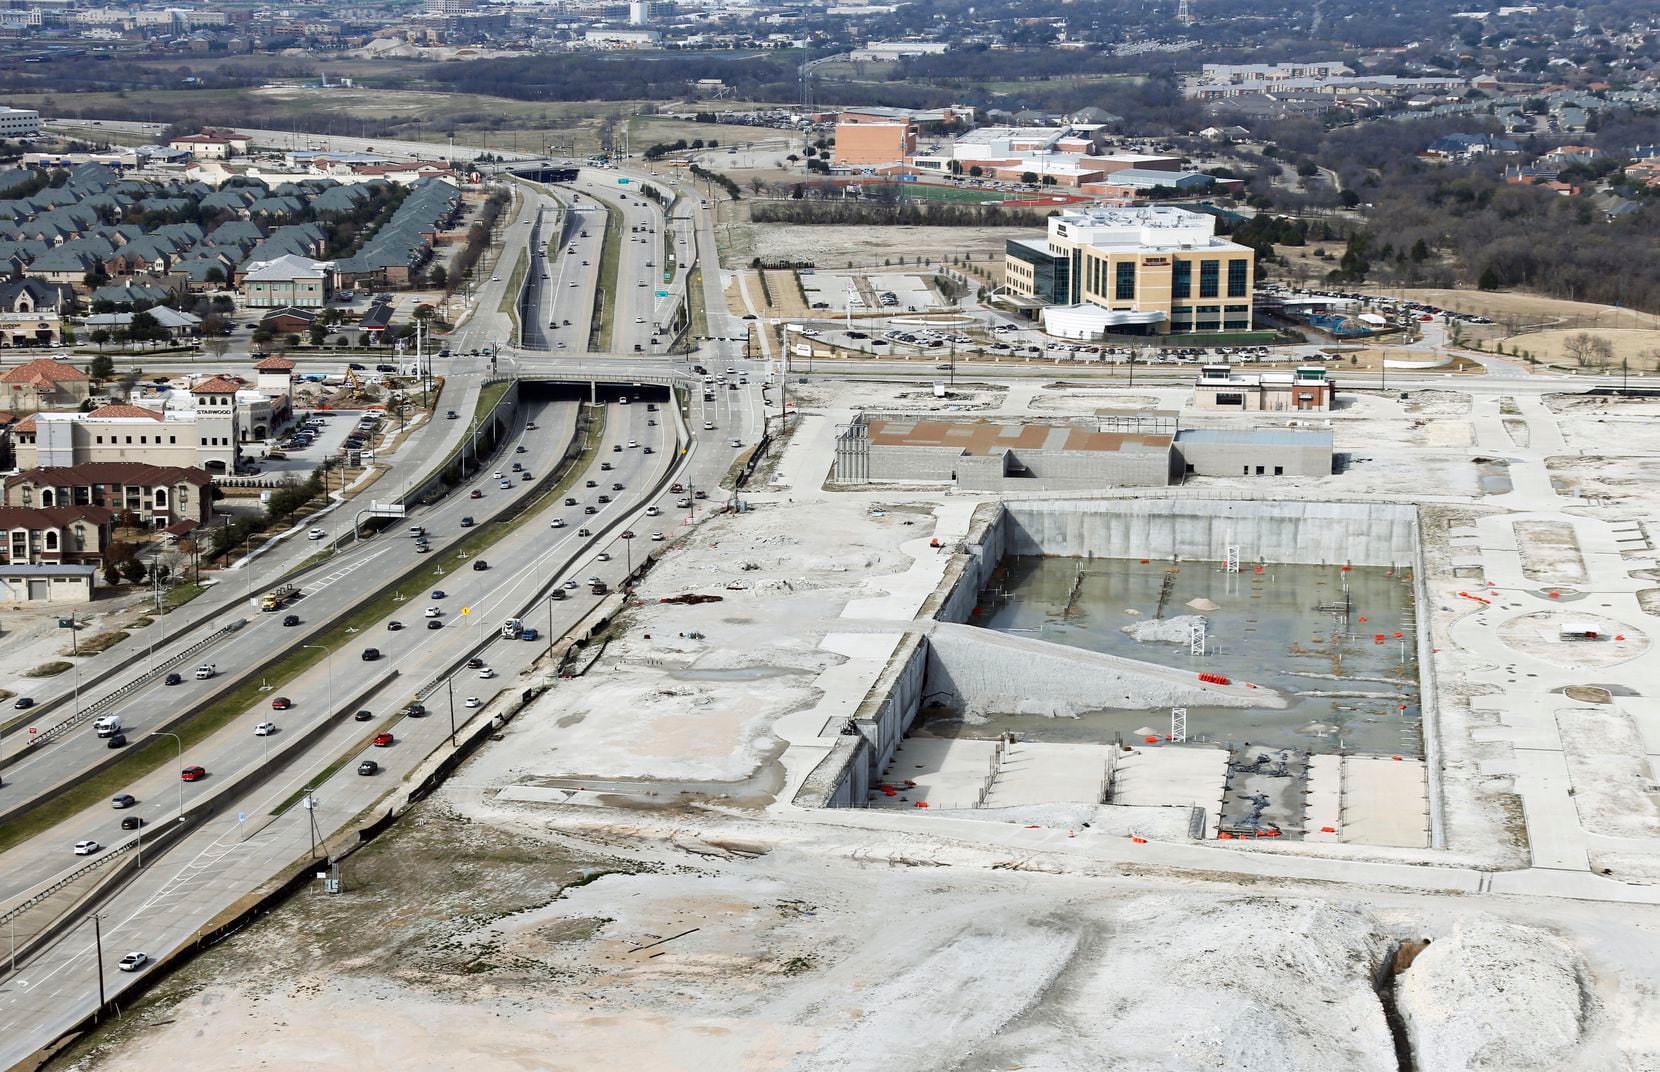 Wade Park sits unfinished next to the Dallas North Tollway in Frisco.